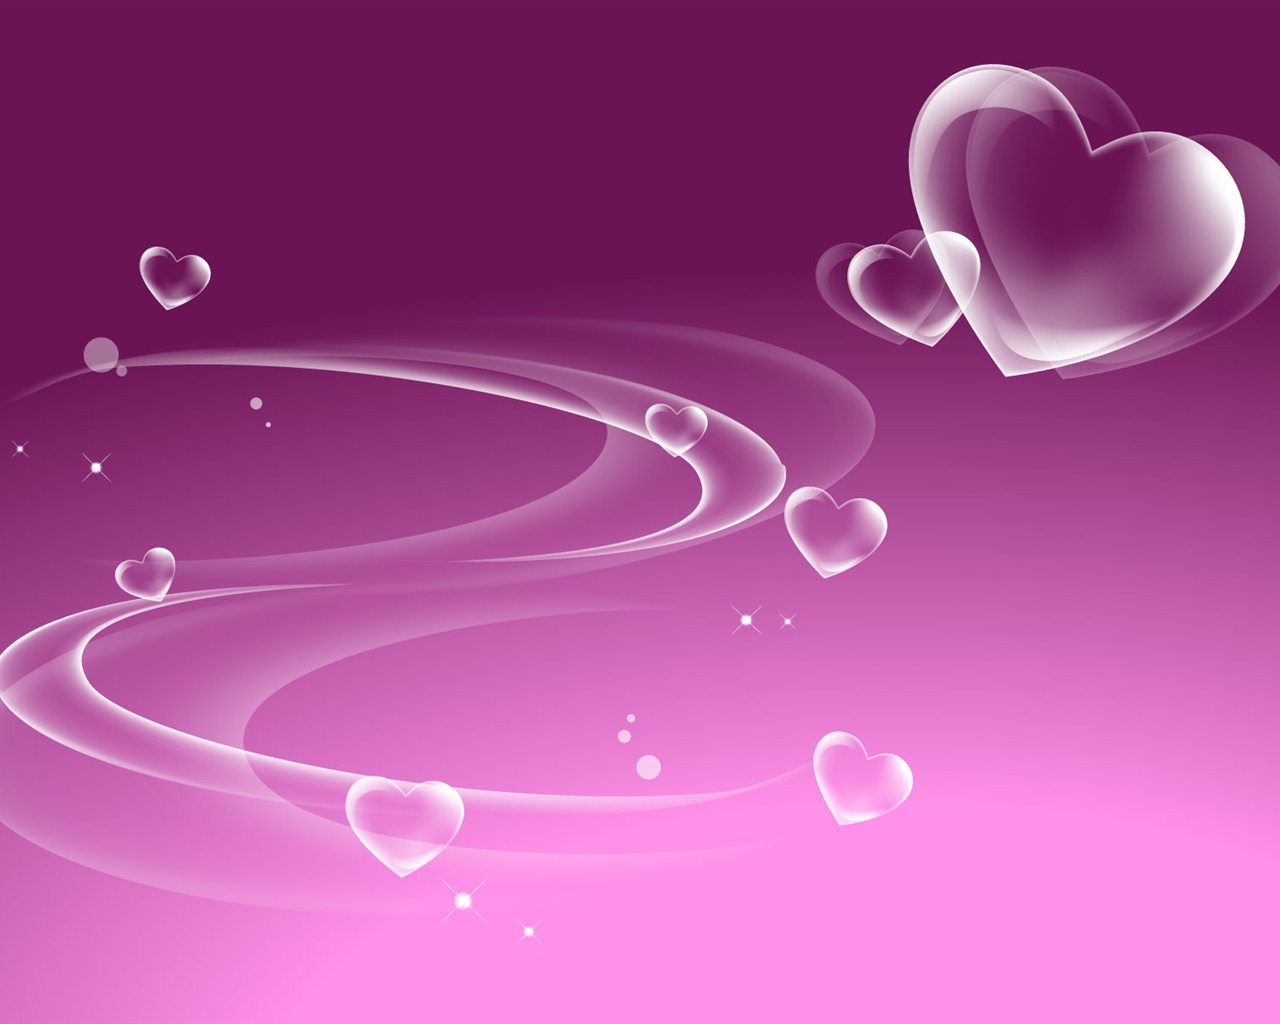 Valentine's Day Love Theme Wallpapers (2) #2 - 1280x1024